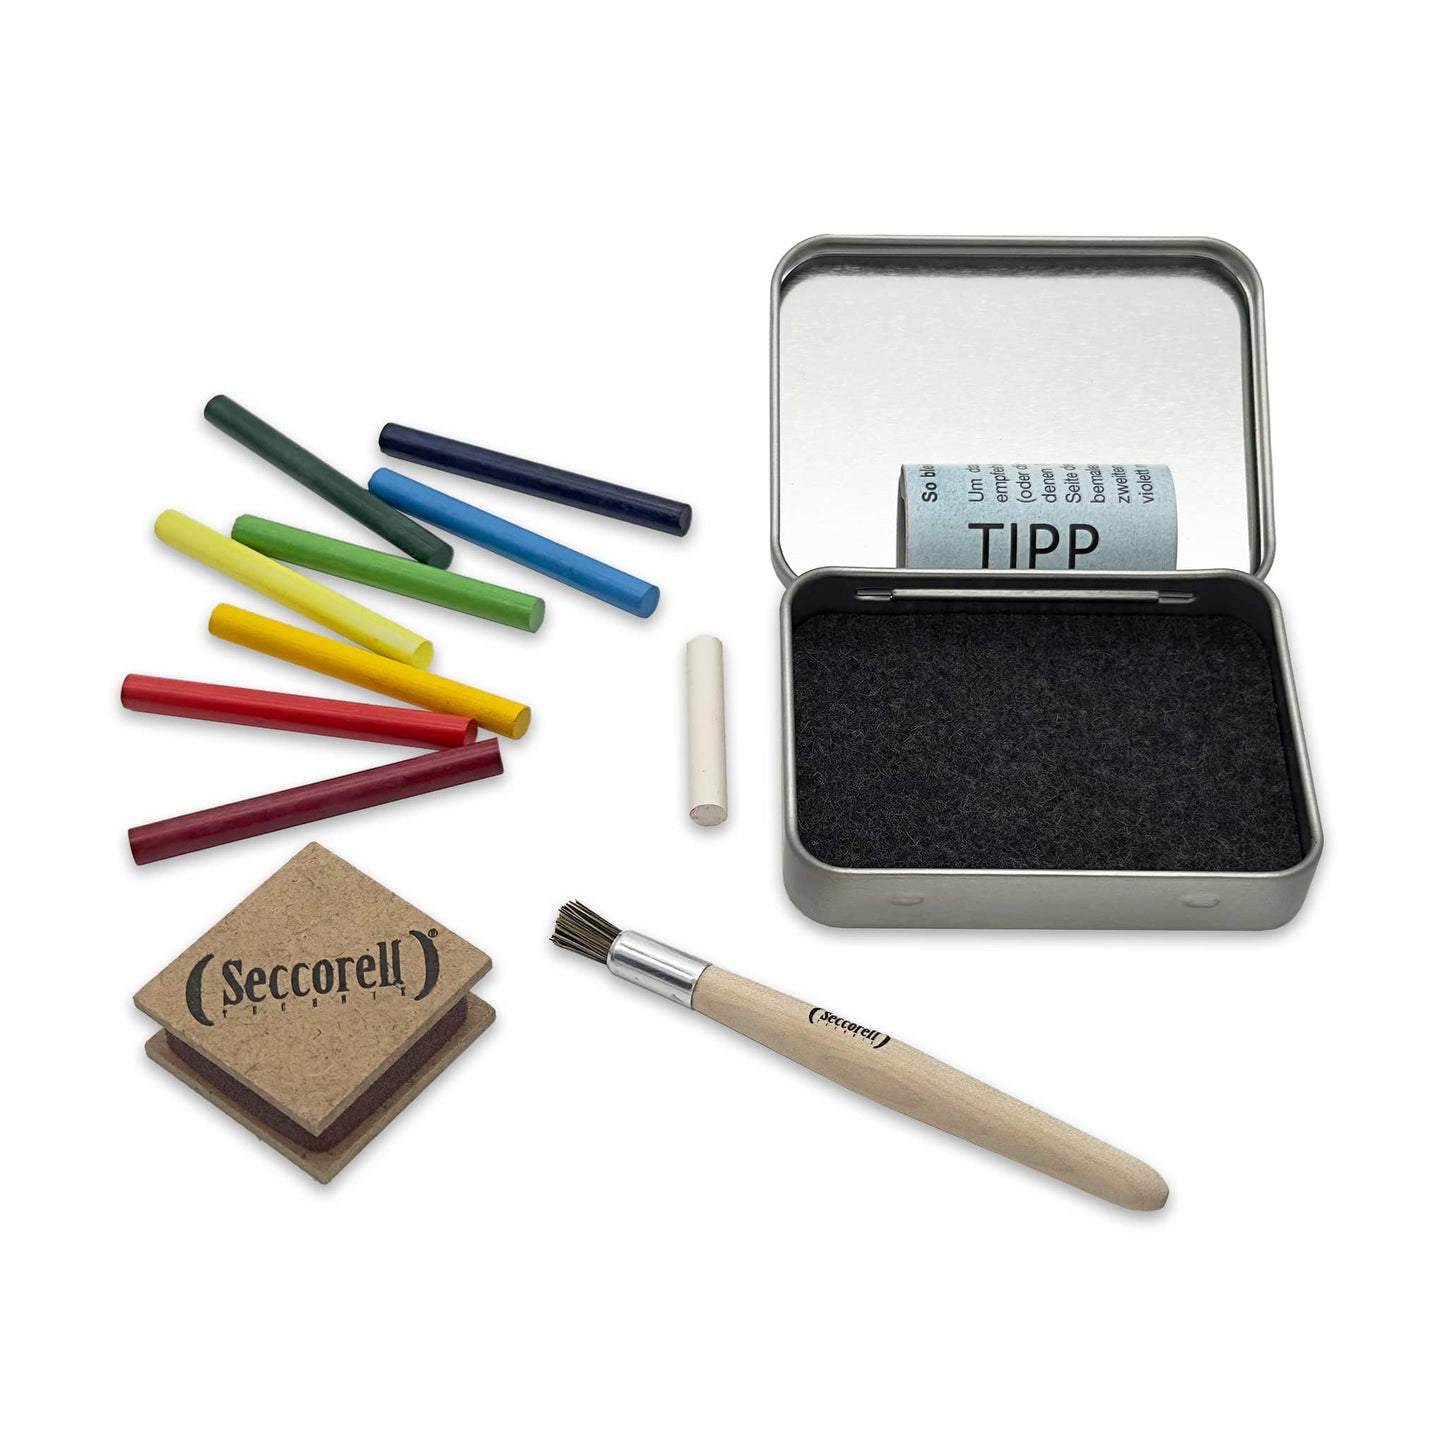 Seccorell Pocket "Magnolia Blossom", shows all the utensils for the painting technique, including 8 paint sticks, rubbing block, cleaning brush, eraser in a practical metal box with felt insert.